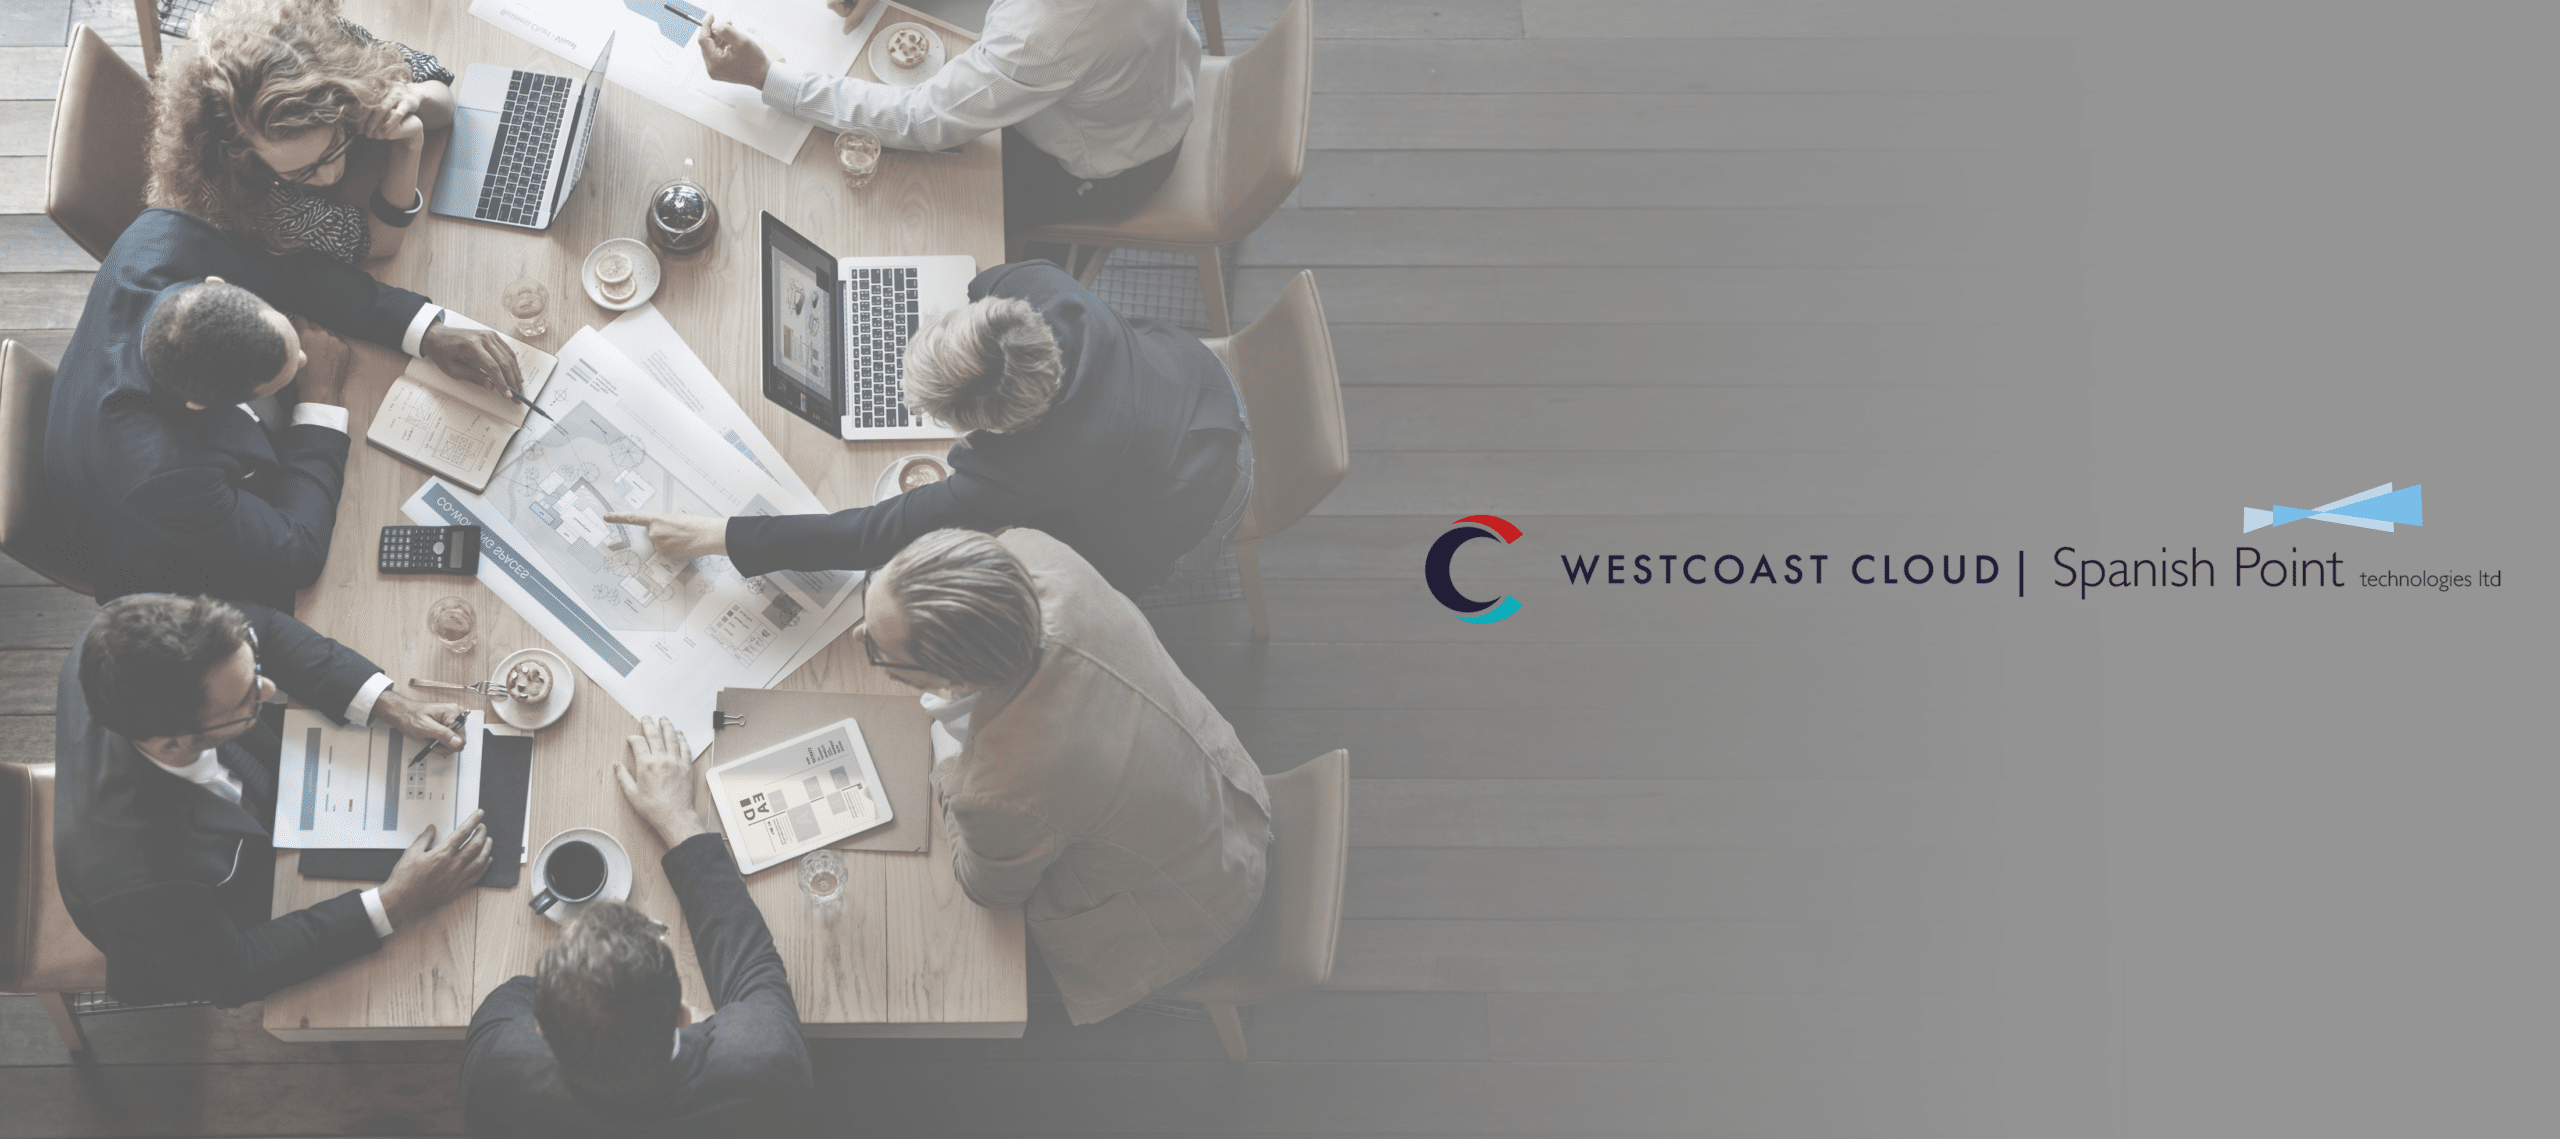 Spanish Point Technologies Proud to Work in Partnership with Westcoast Cloud